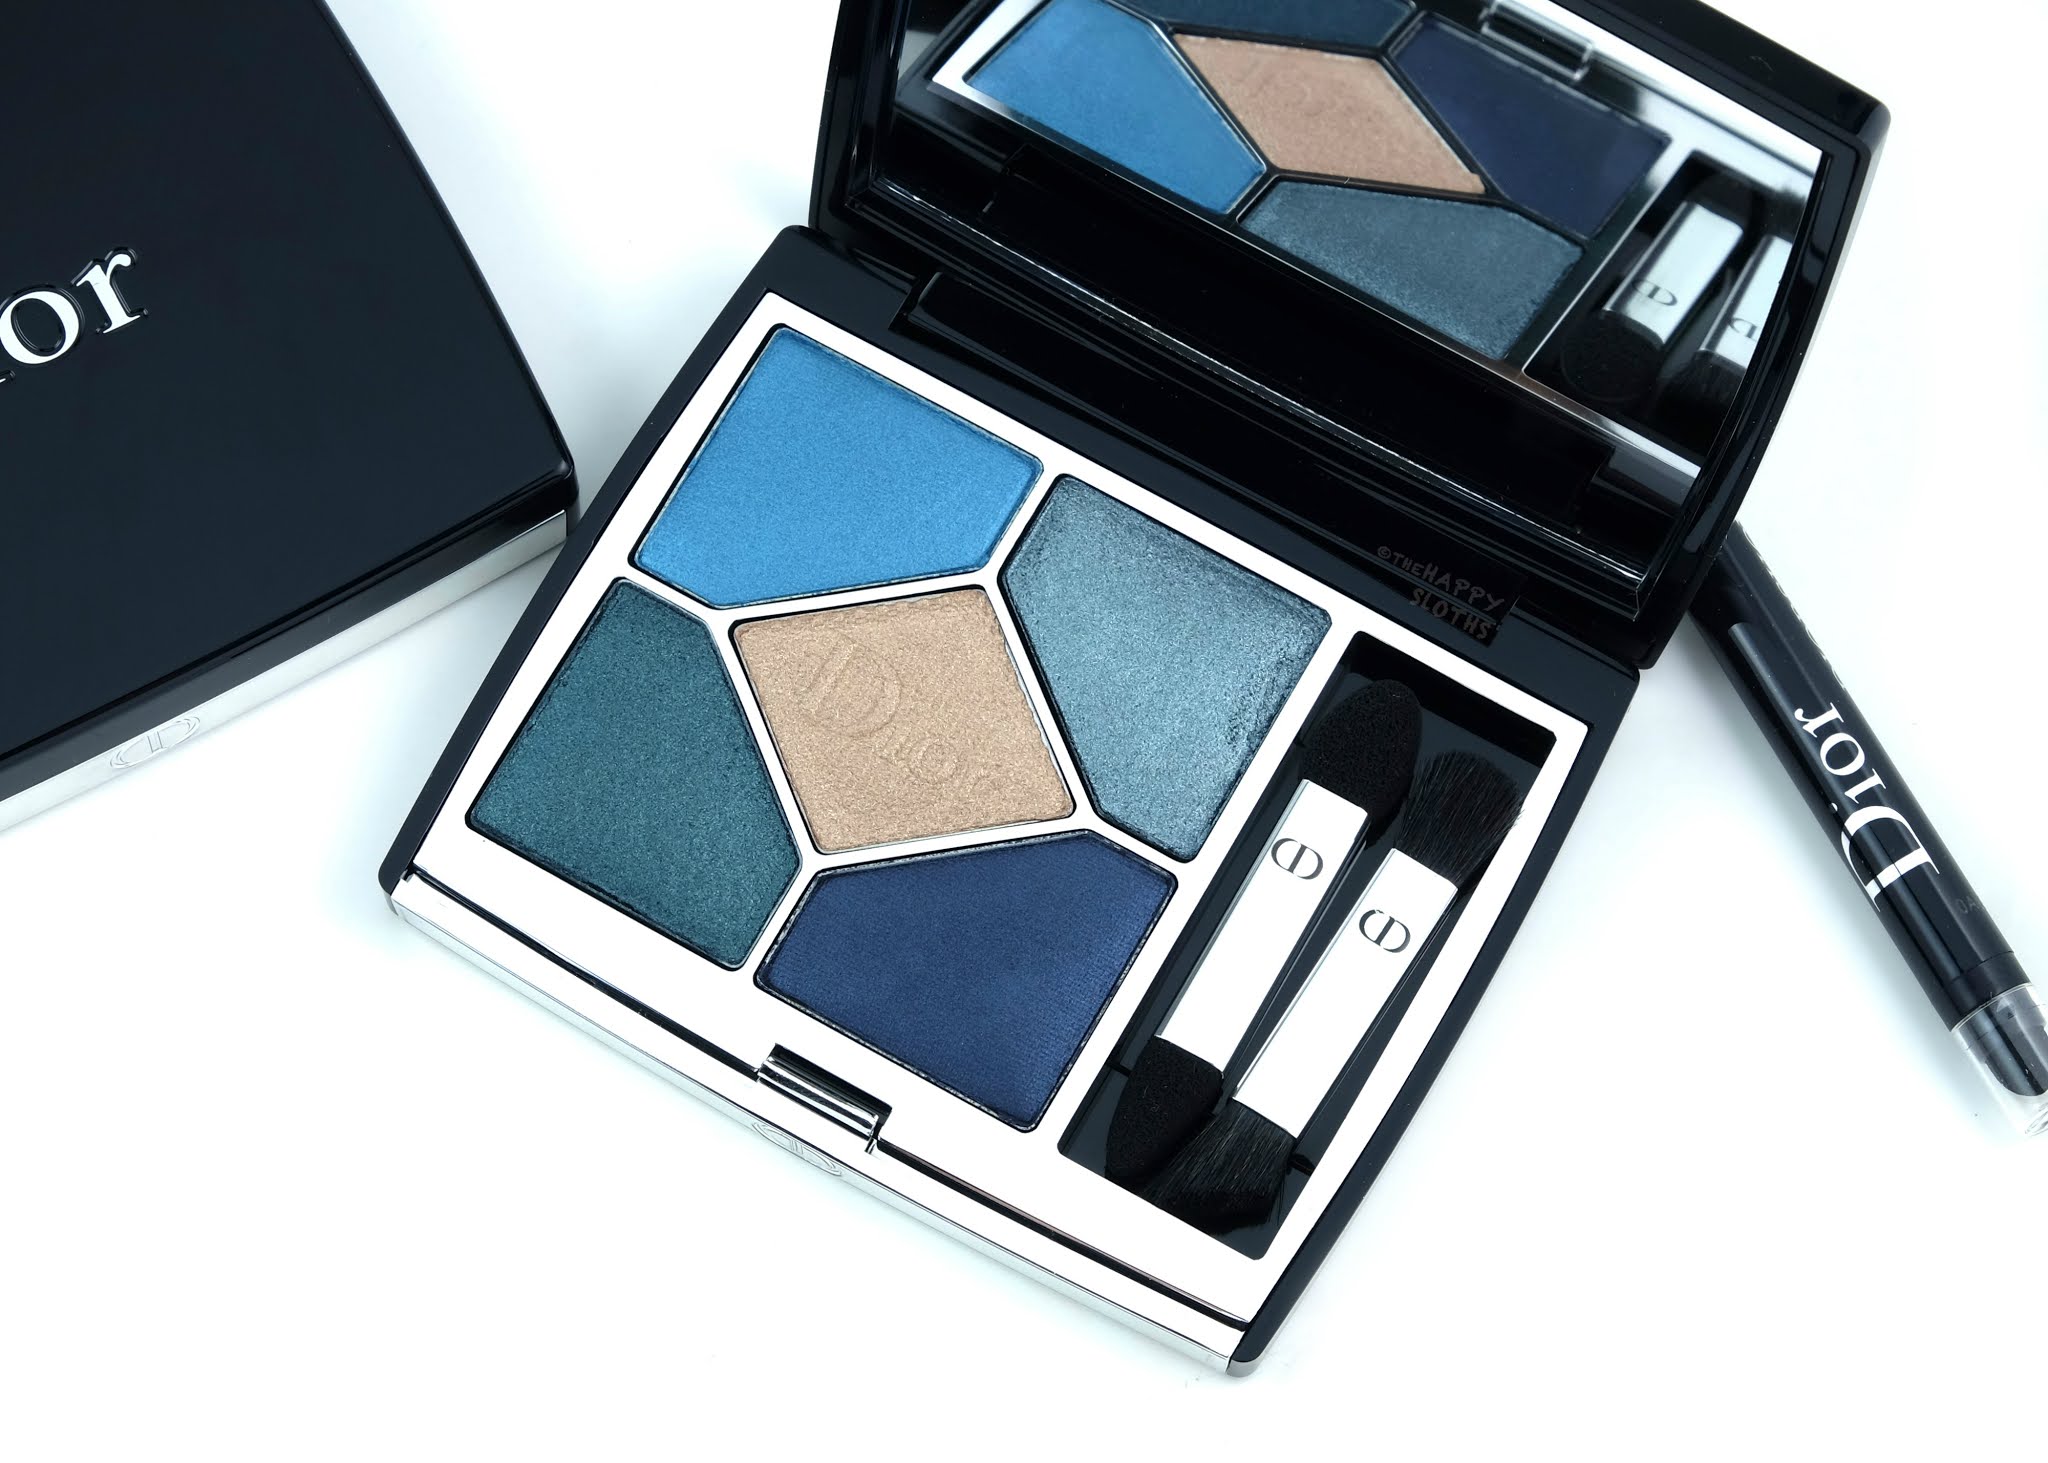 Dior Fall 2020 5 Couleurs Couture Eyeshadow Palette